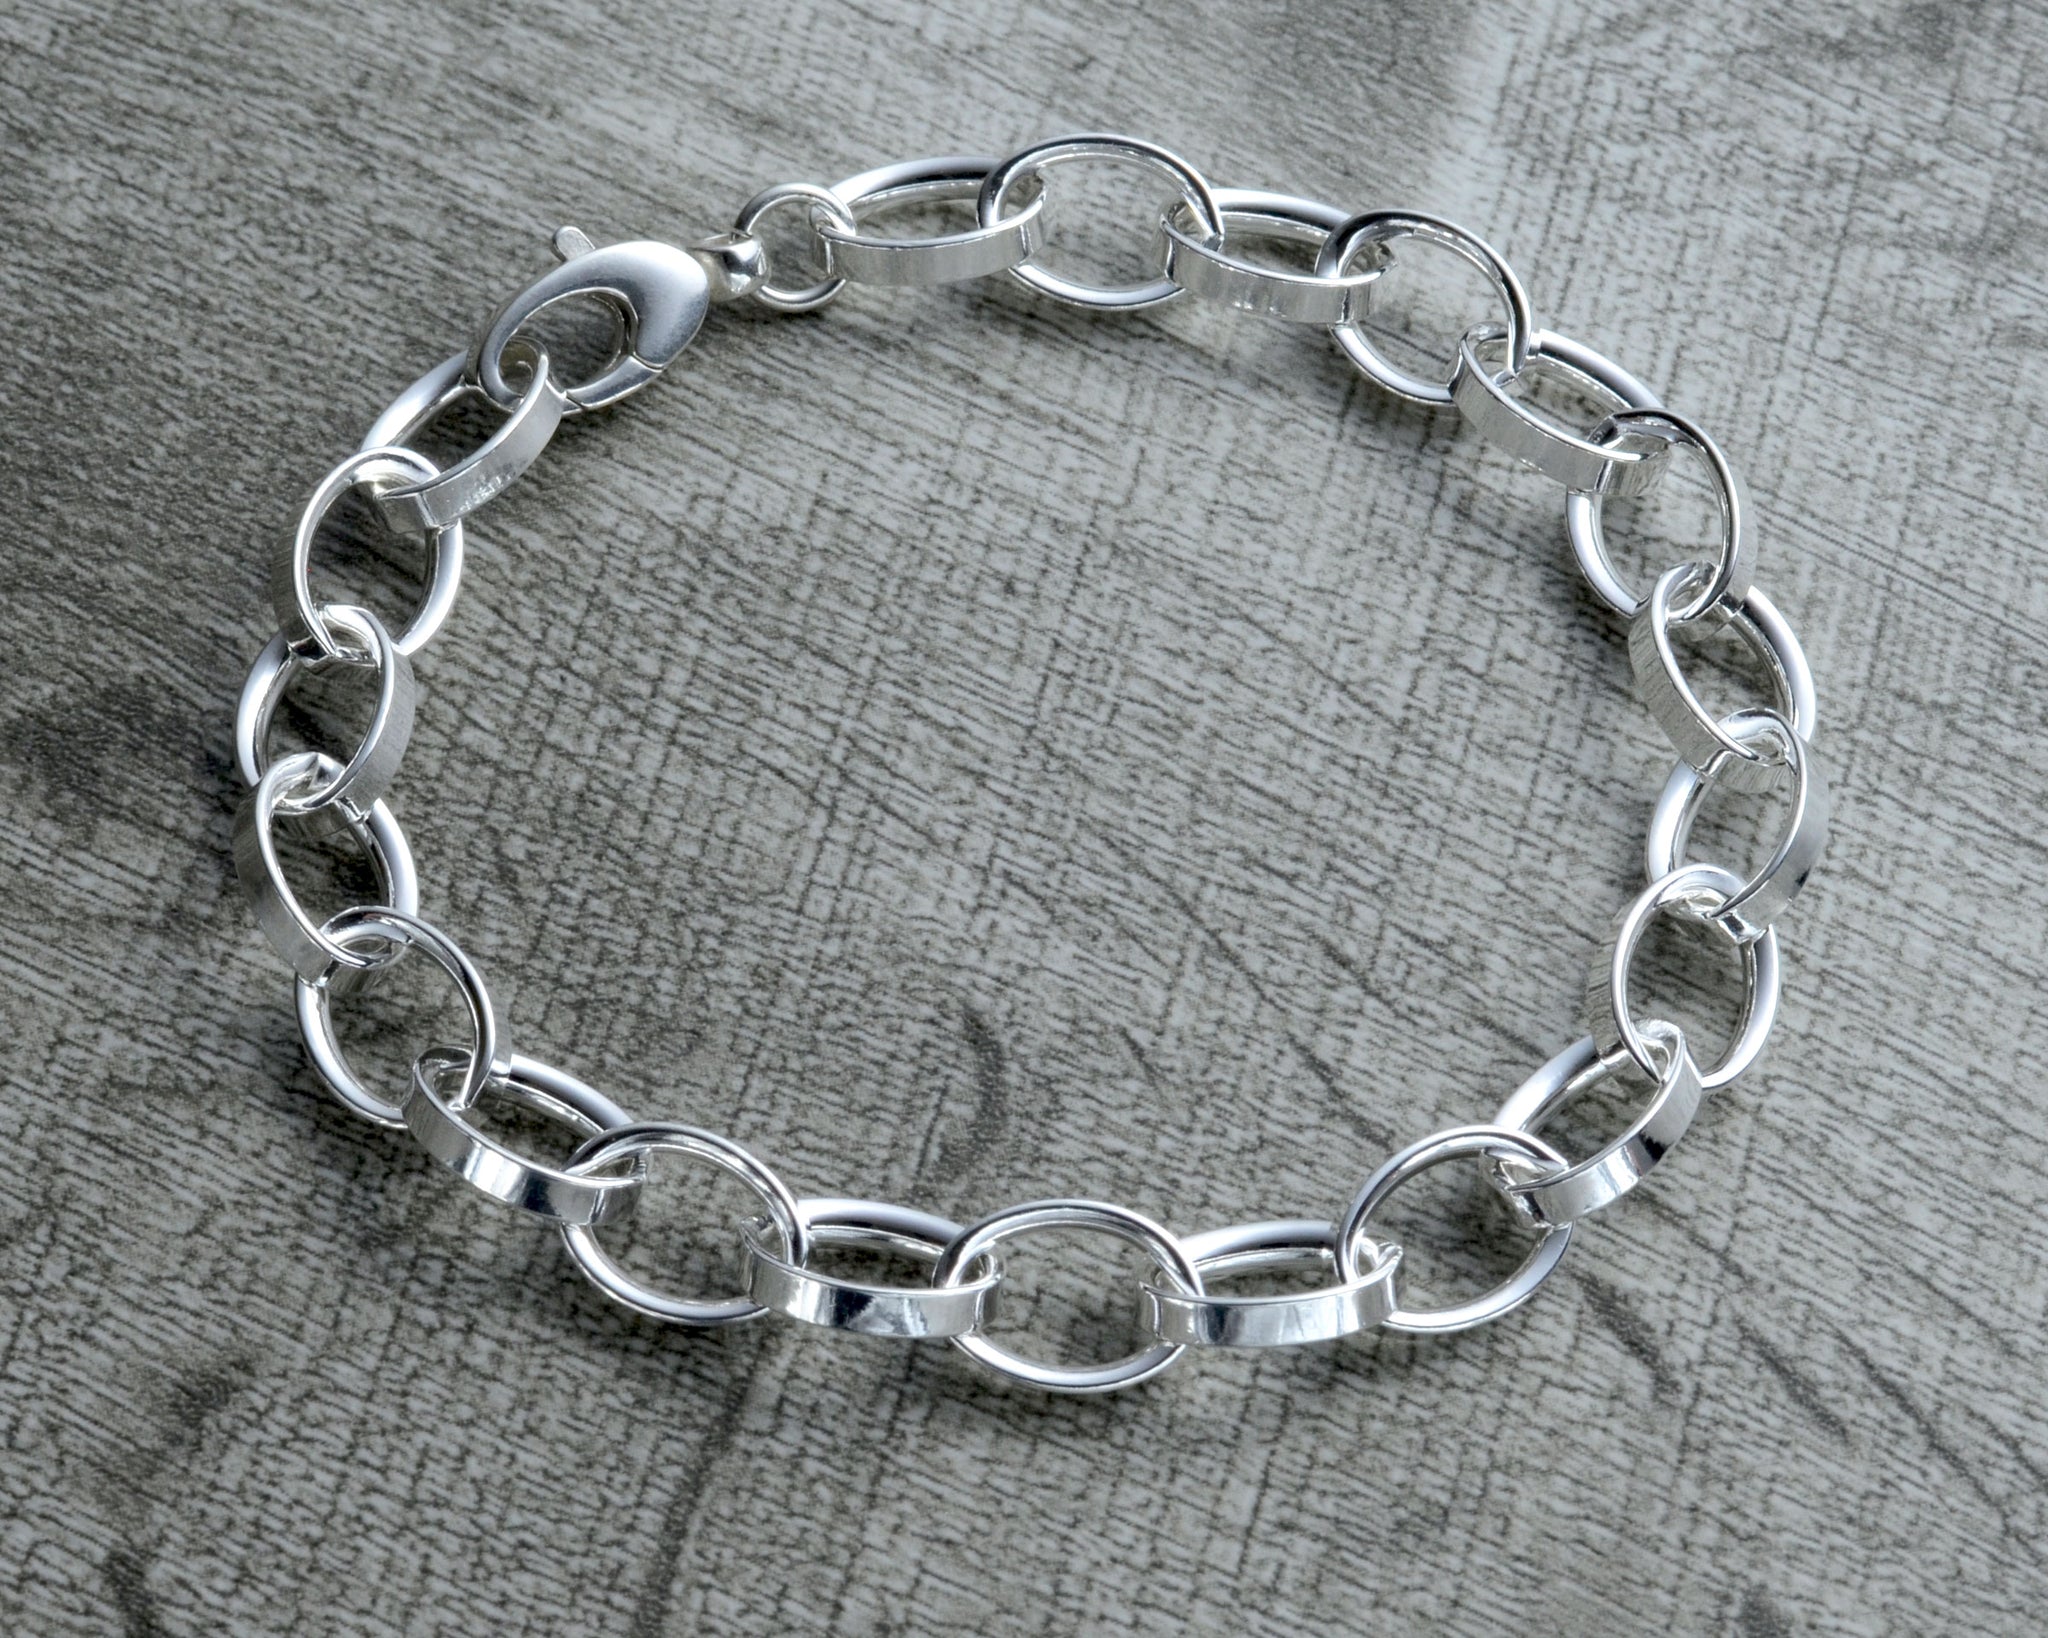 Classic Sterling Silver Charm Bracelet | Wellesley Row 7.1